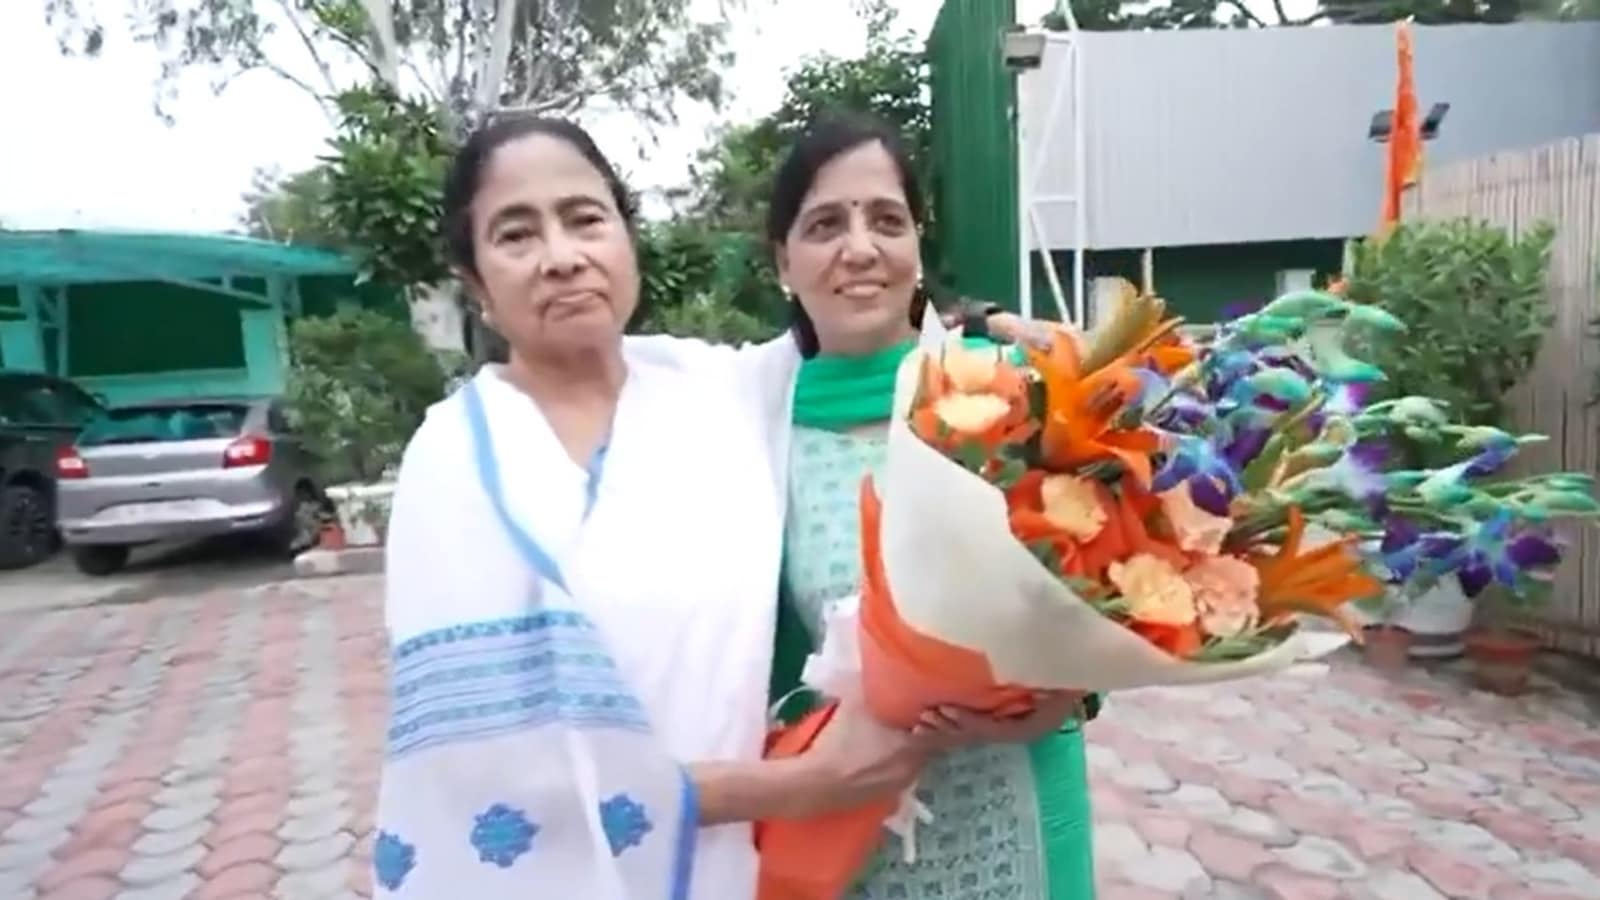 Watch: West Bengal CM Mamata Banerjee meets Arvind Kejriwal’s wife in Delhi | Latest News India